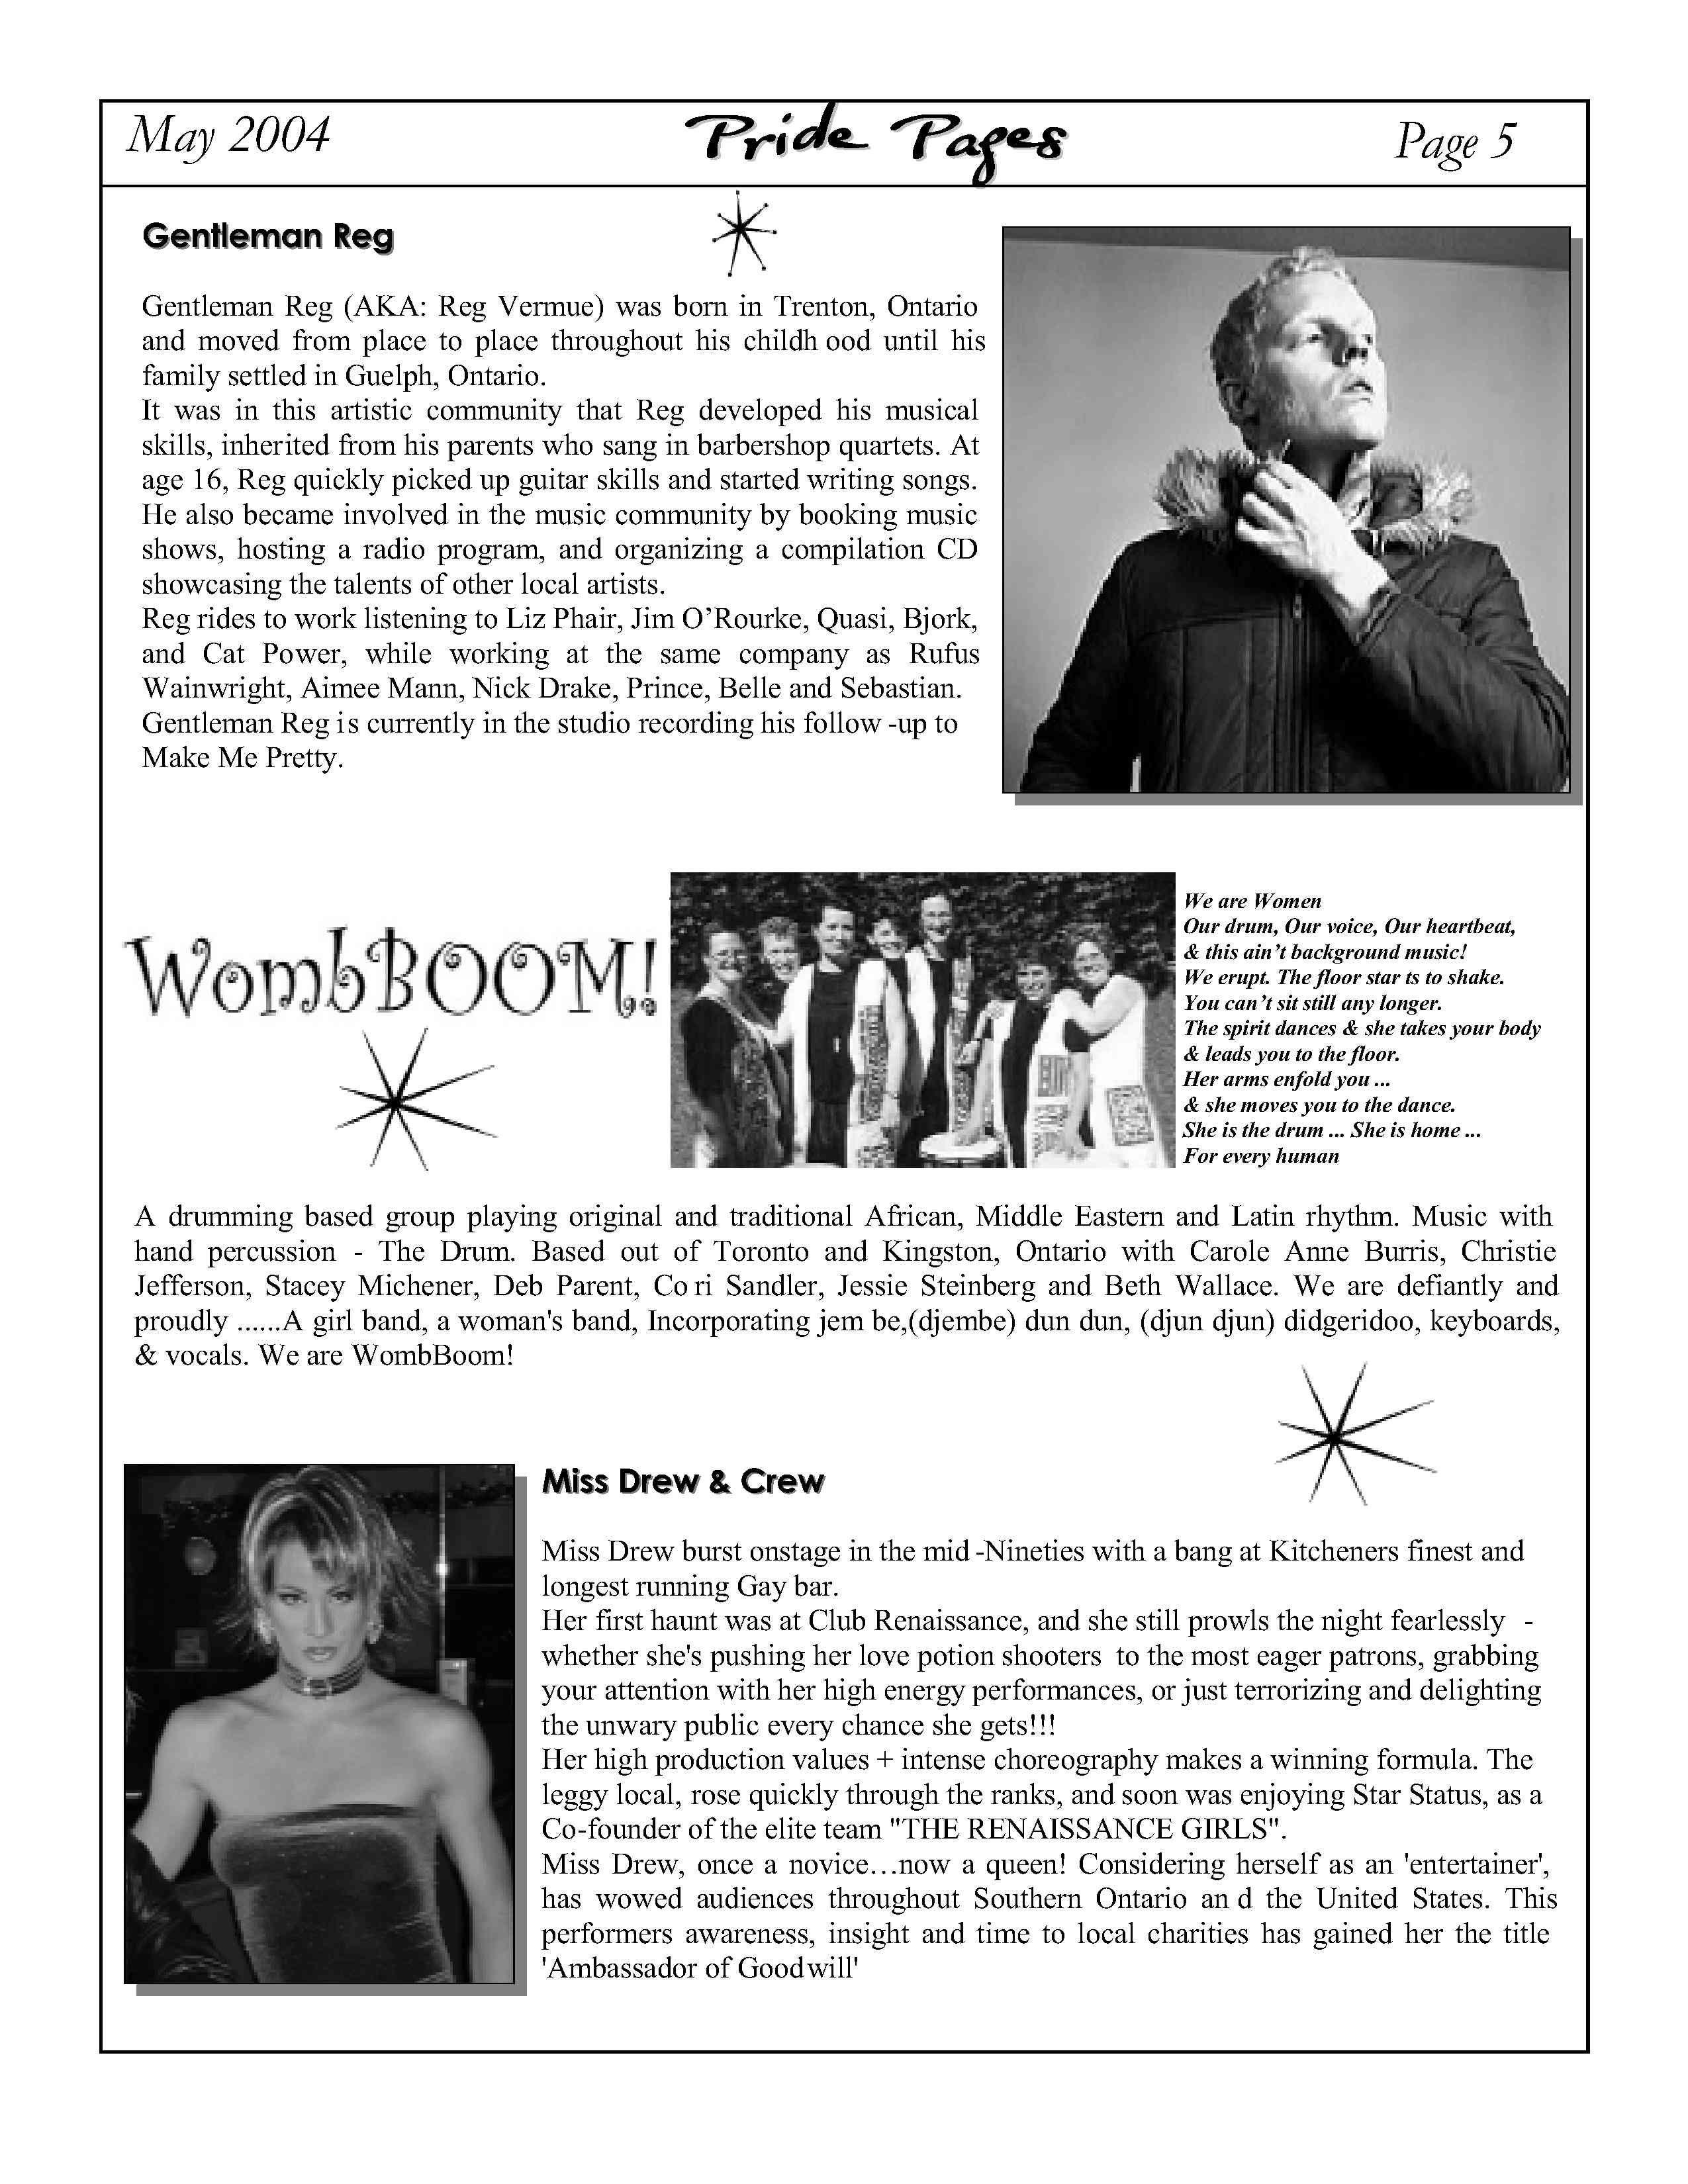 Pride Pages 2004-05 p5